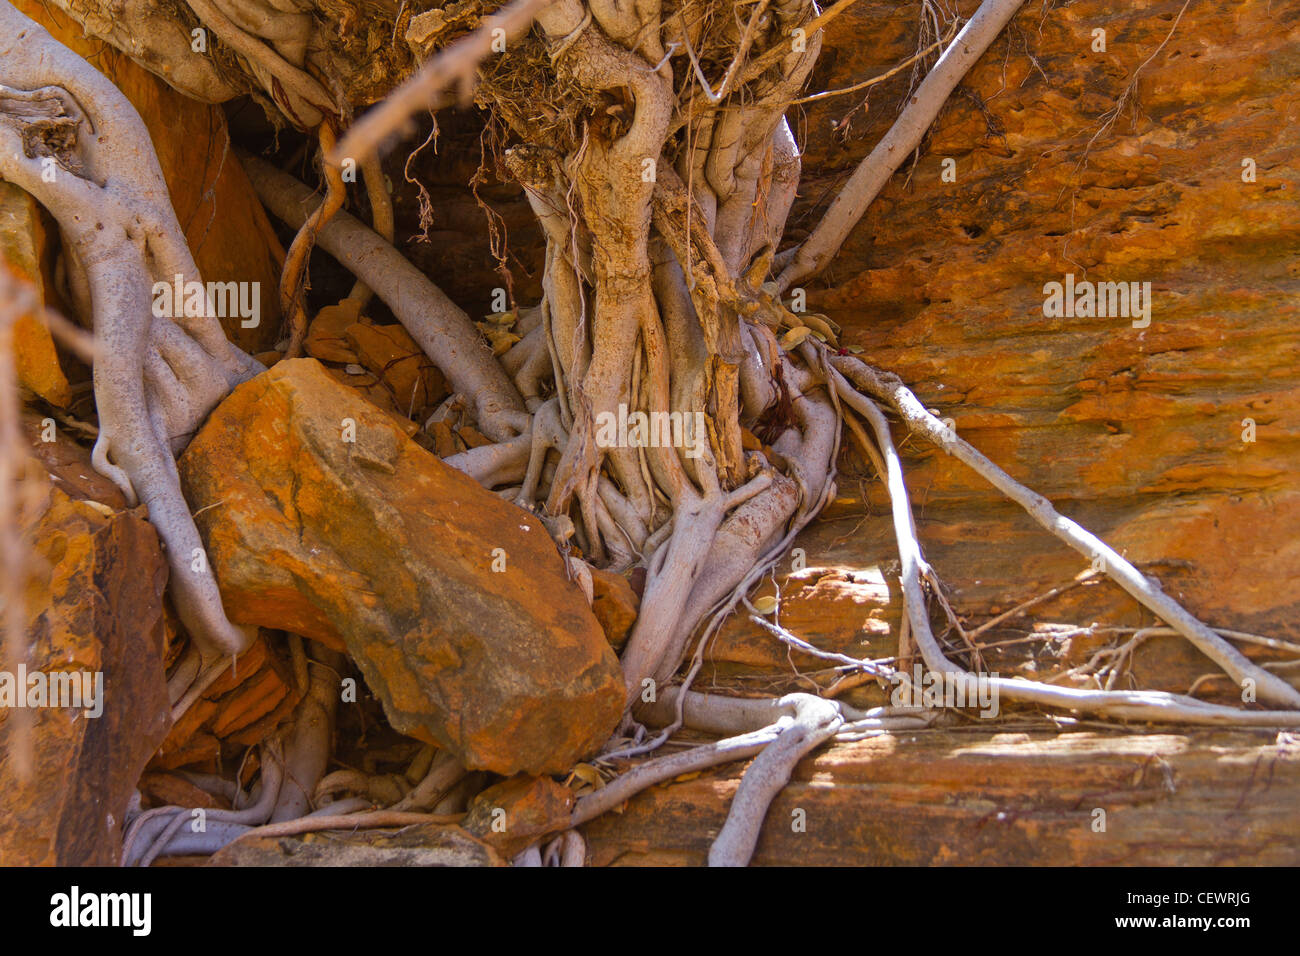 Roots searching Water  tale land Stock Photo